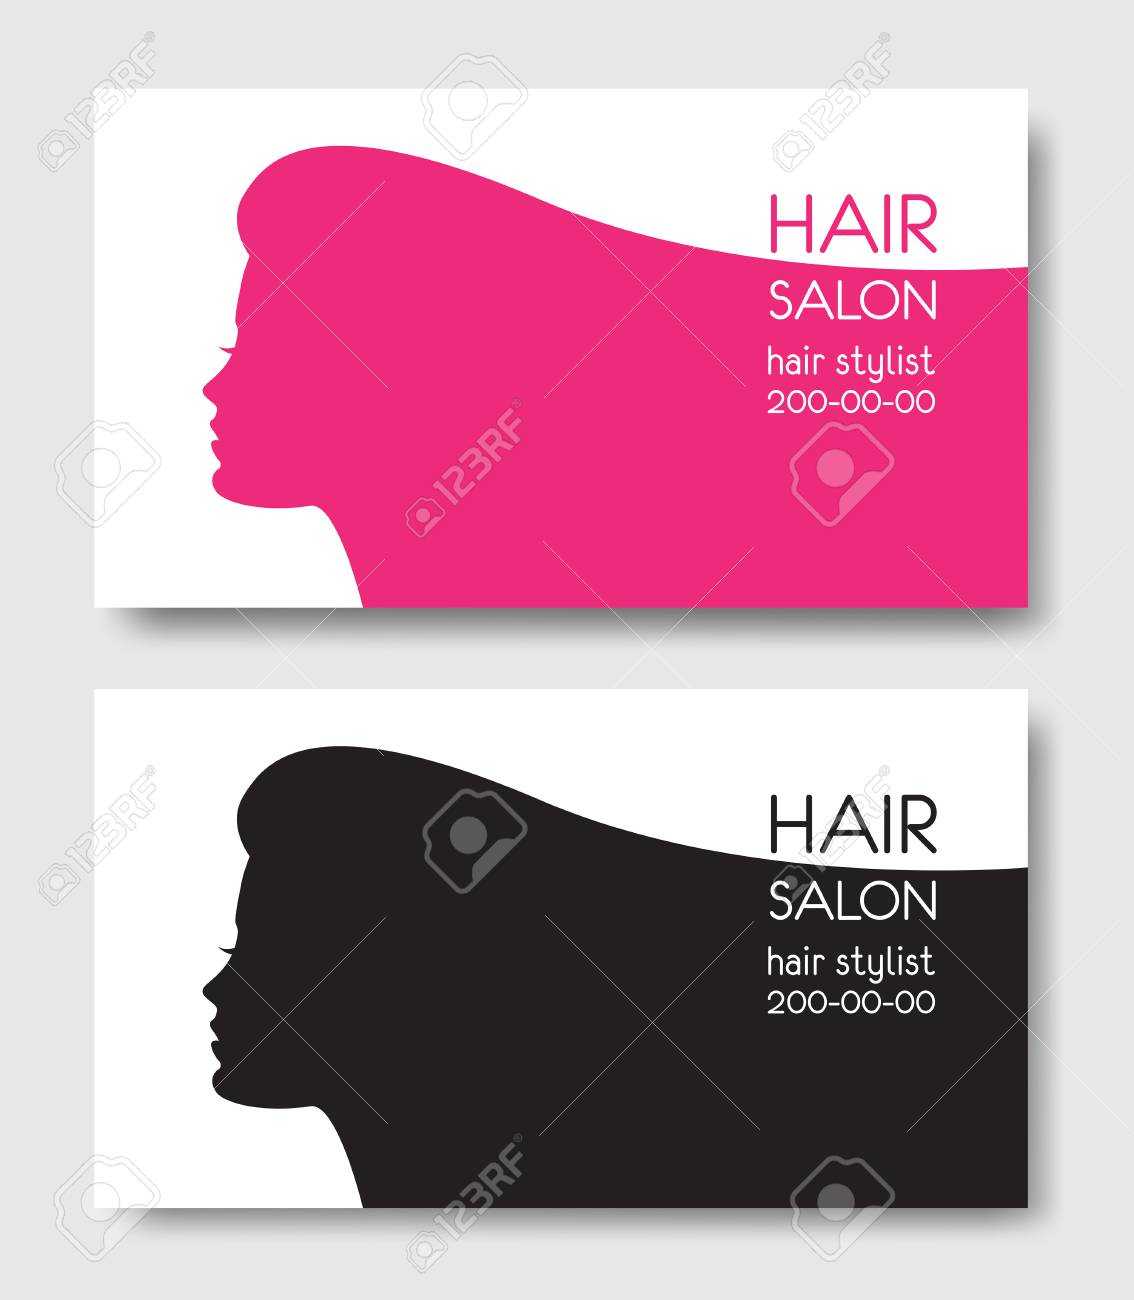 Hair Salon Business Card Templates With Beautiful Woman Face Sil Intended For Hair Salon Business Card Template